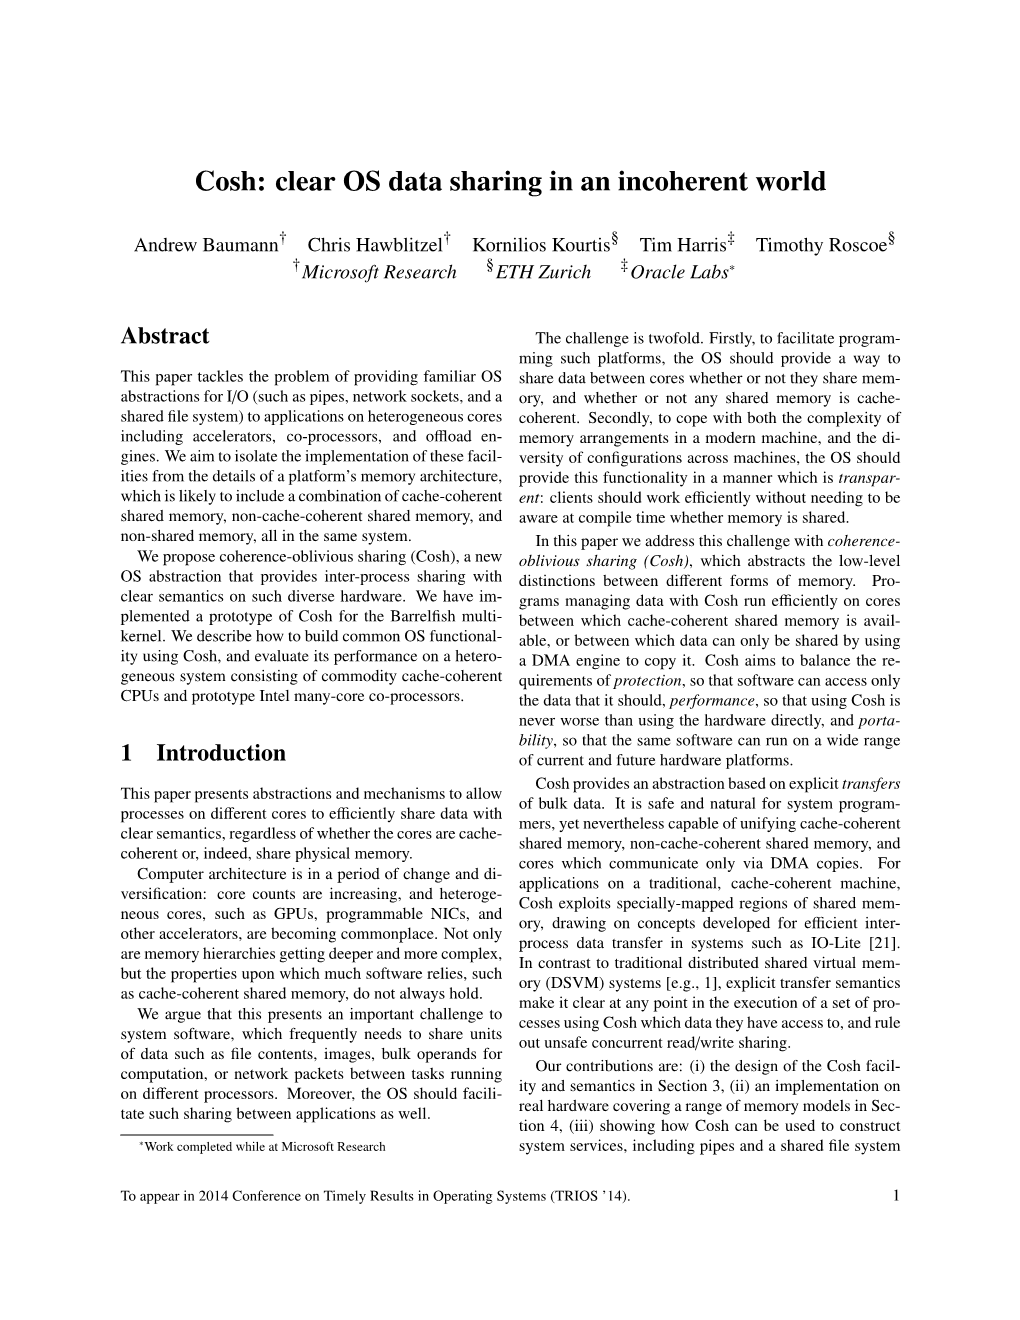 Cosh: Clear OS Data Sharing in an Incoherent World